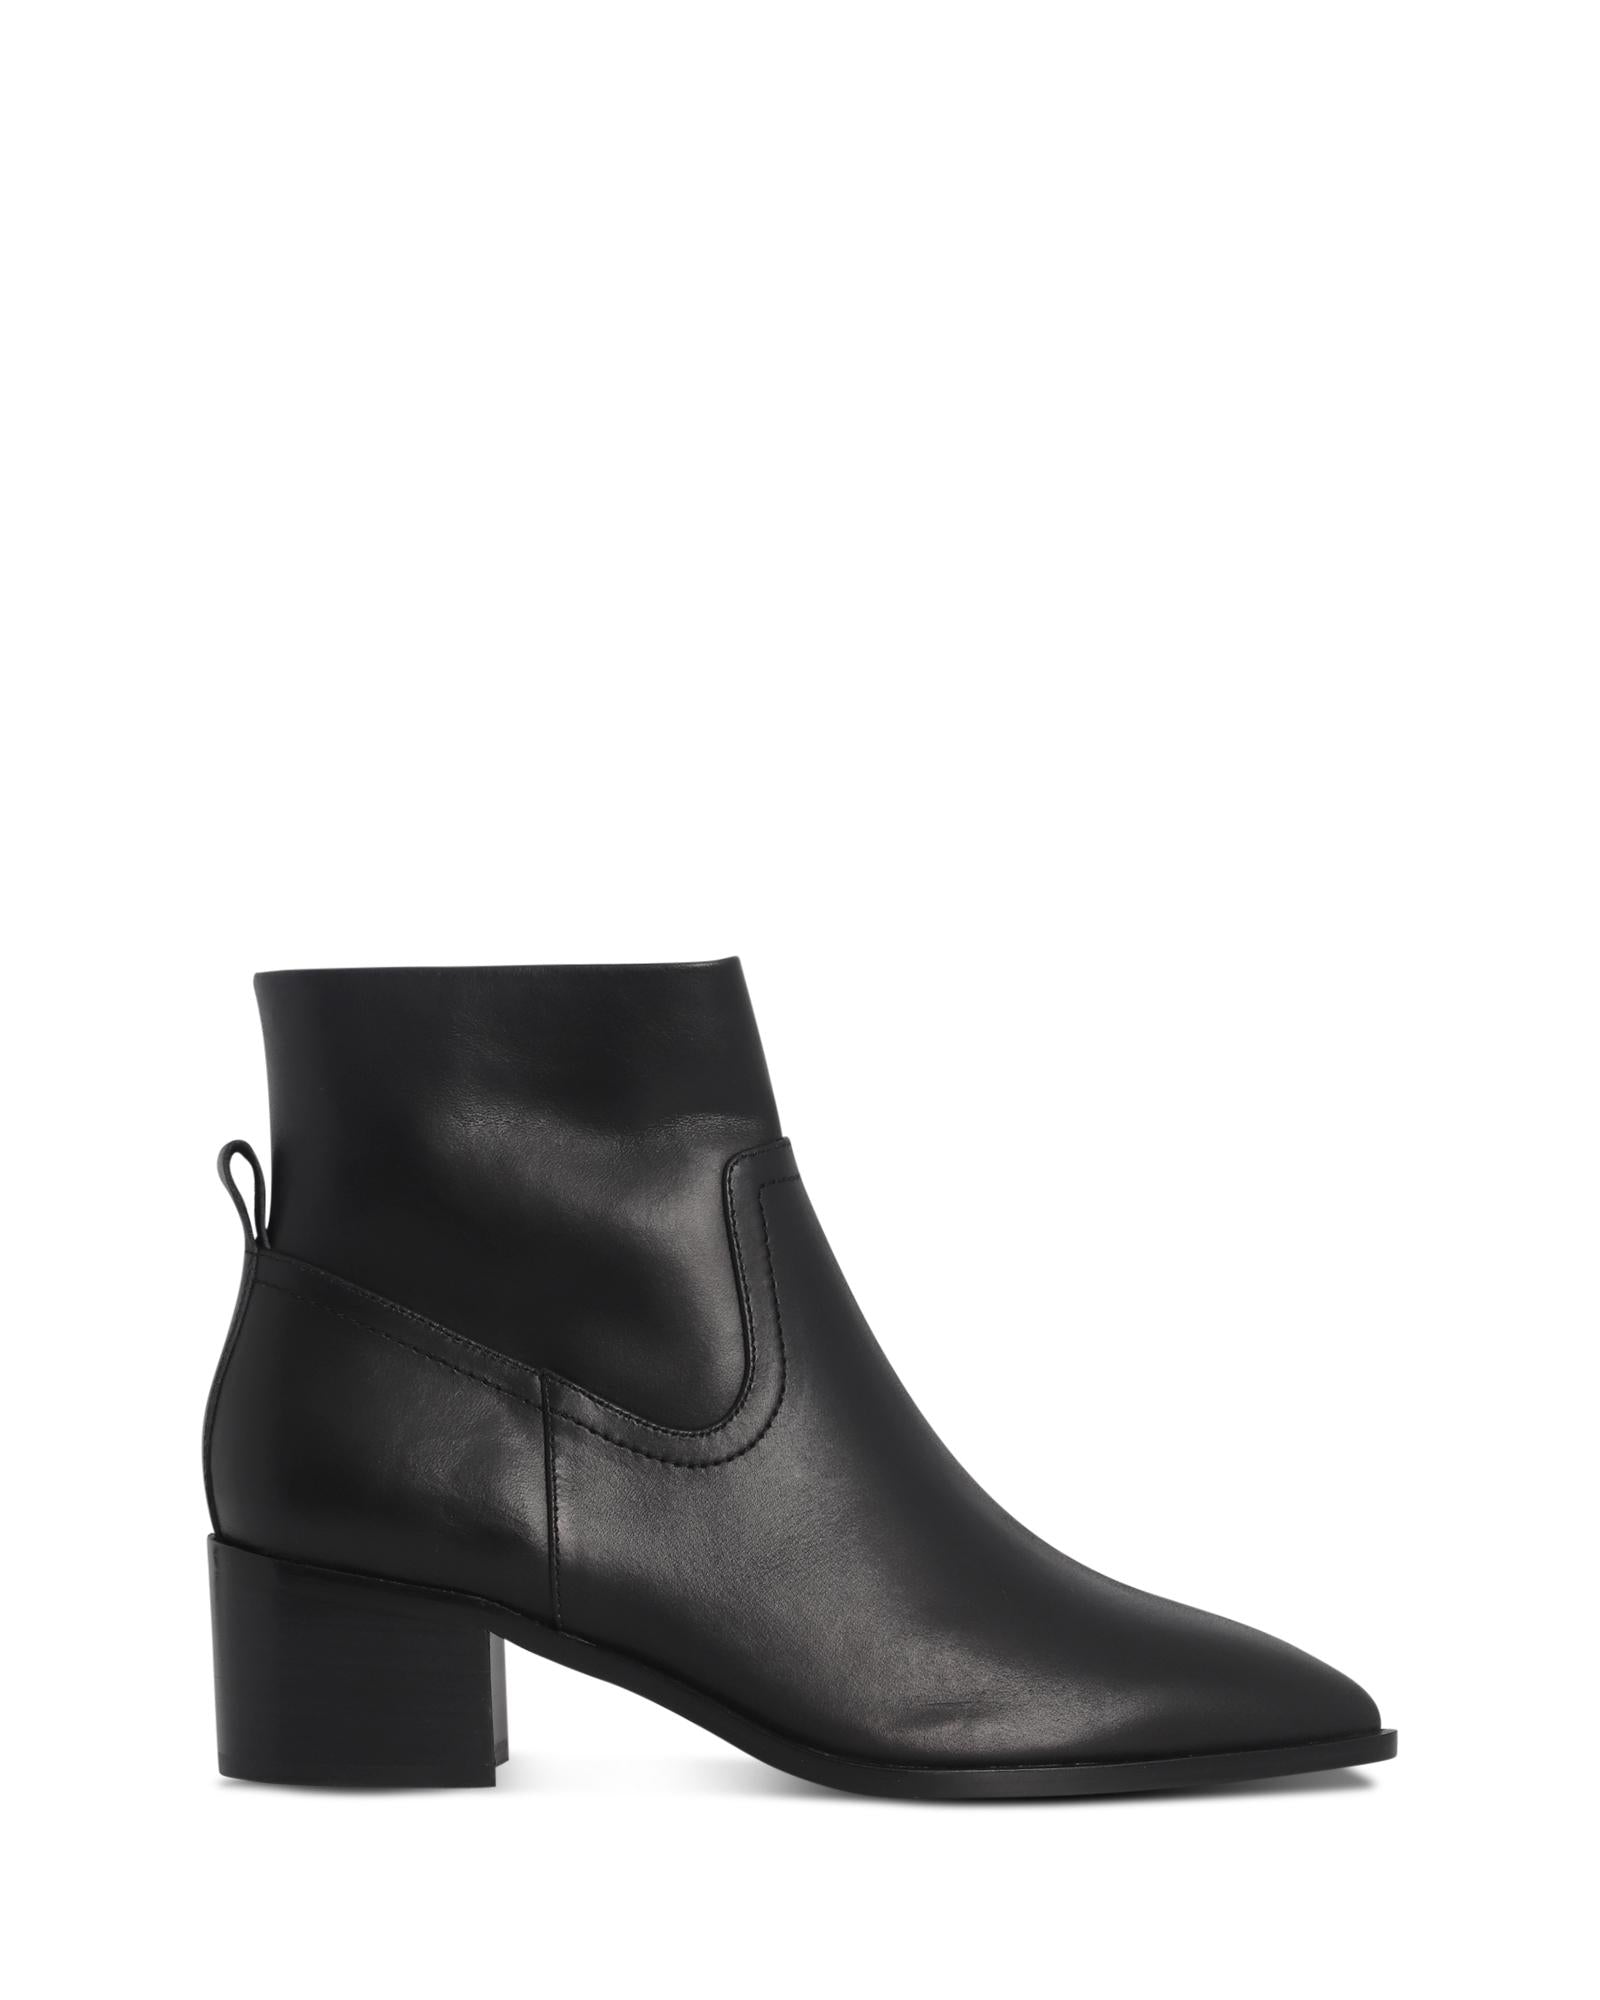 Haven Black Ankle Boot with 4cm Block Heel and Point Toe 